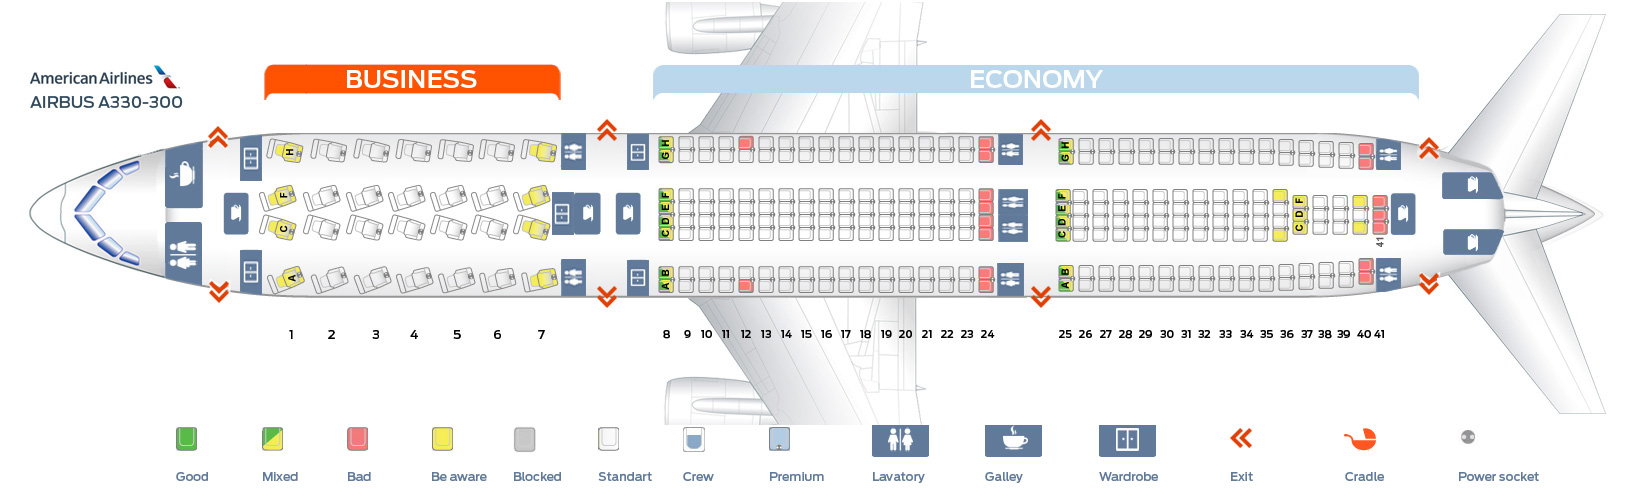 A330 300 Seating Chart